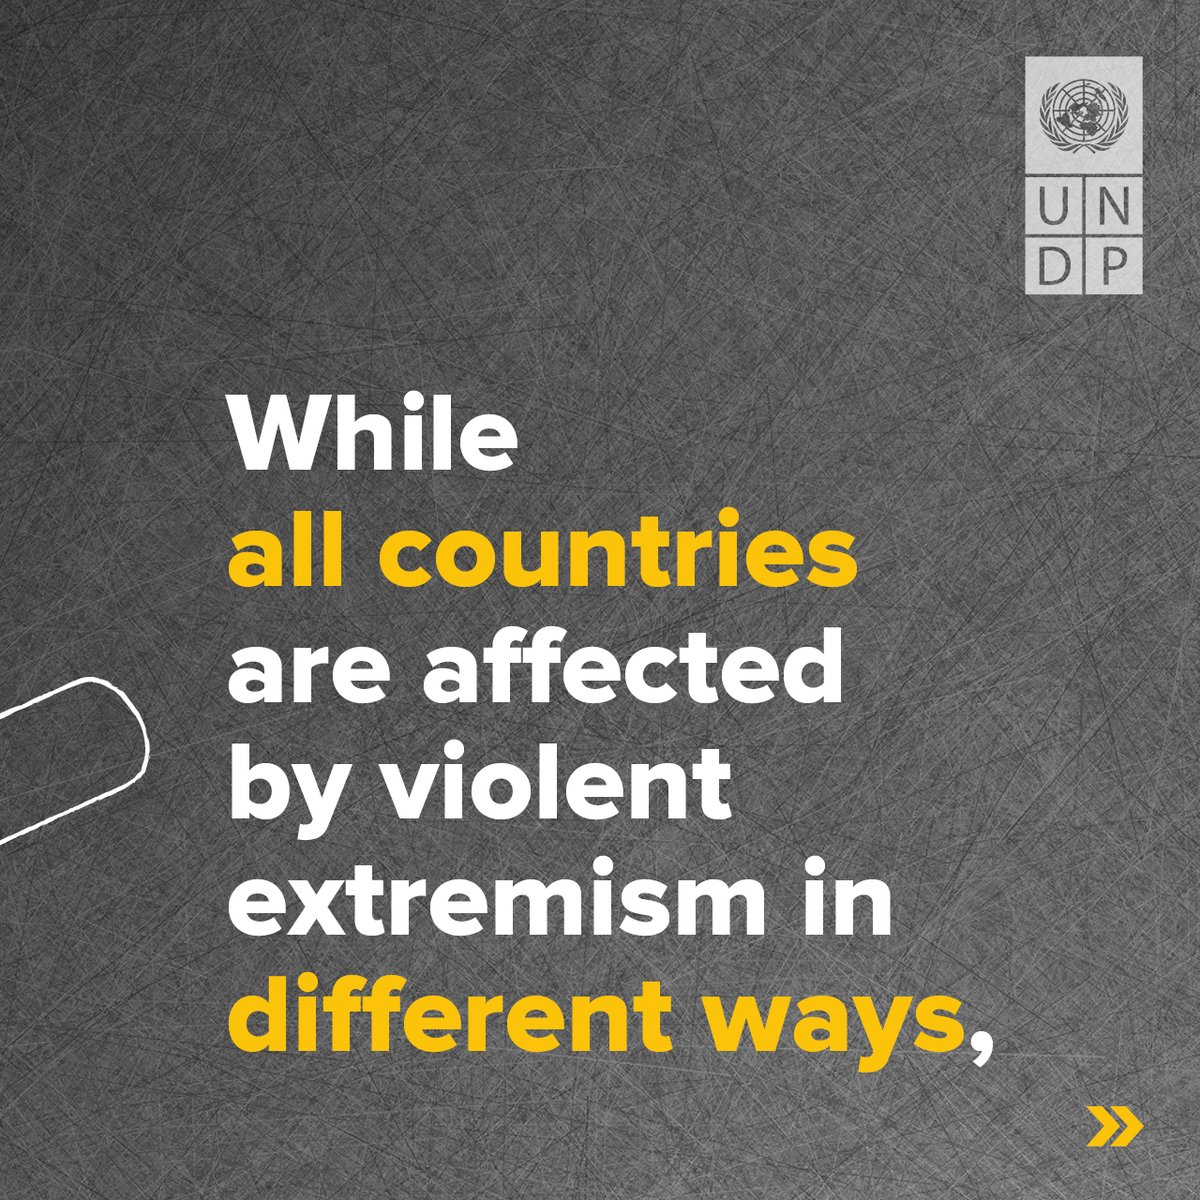 Today marks the first-ever Int’l Day for the Prevention of #ViolentExtremism. 
Development responses are crucial in interrupting the journey to extremism and ensuring a more peaceful, inclusive world for all. 

#undpindonesia #protectproject